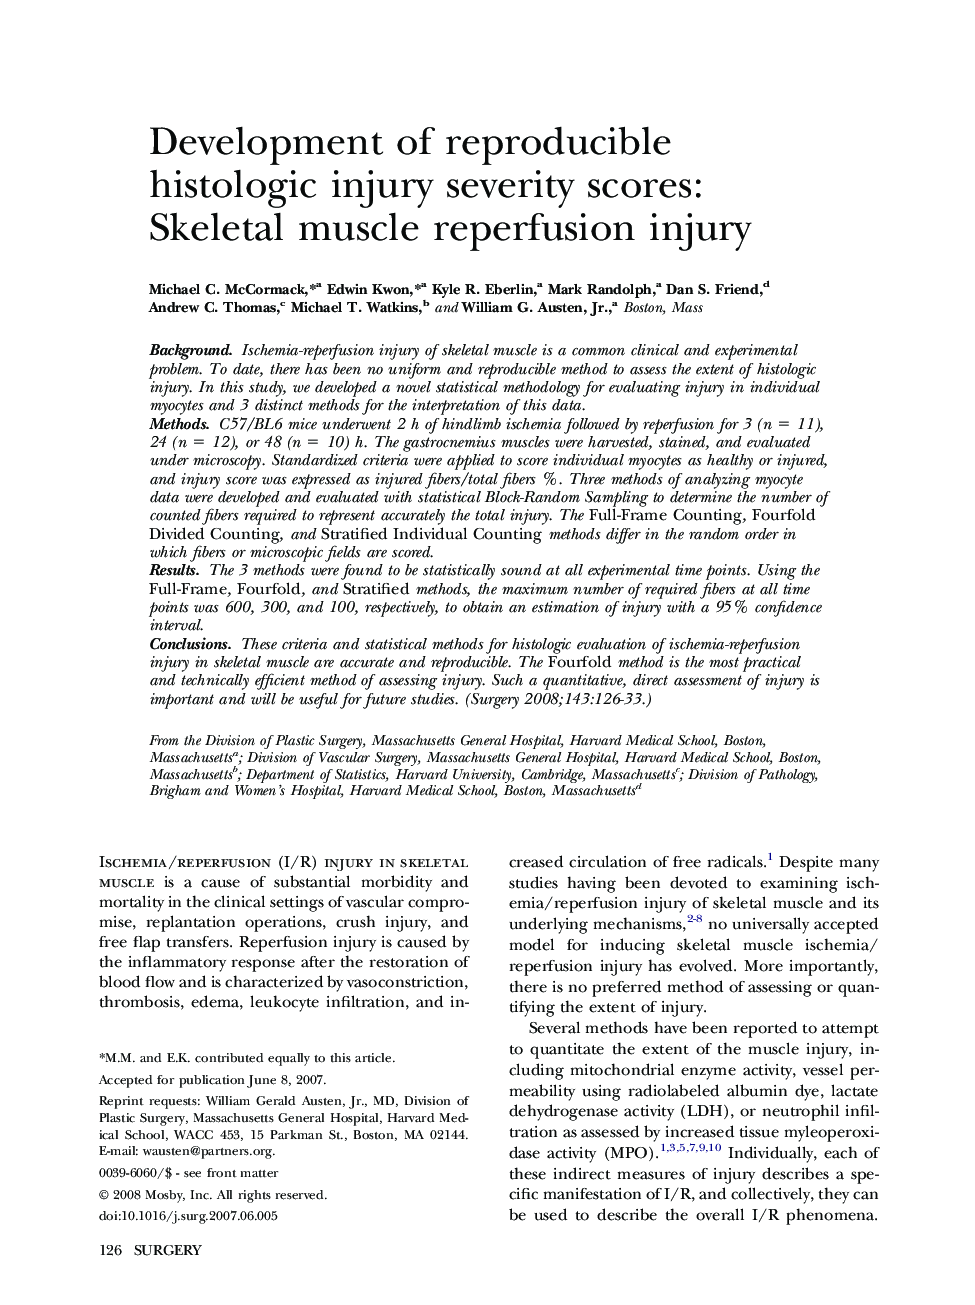 Development of reproducible histologic injury severity scores: Skeletal muscle reperfusion injury